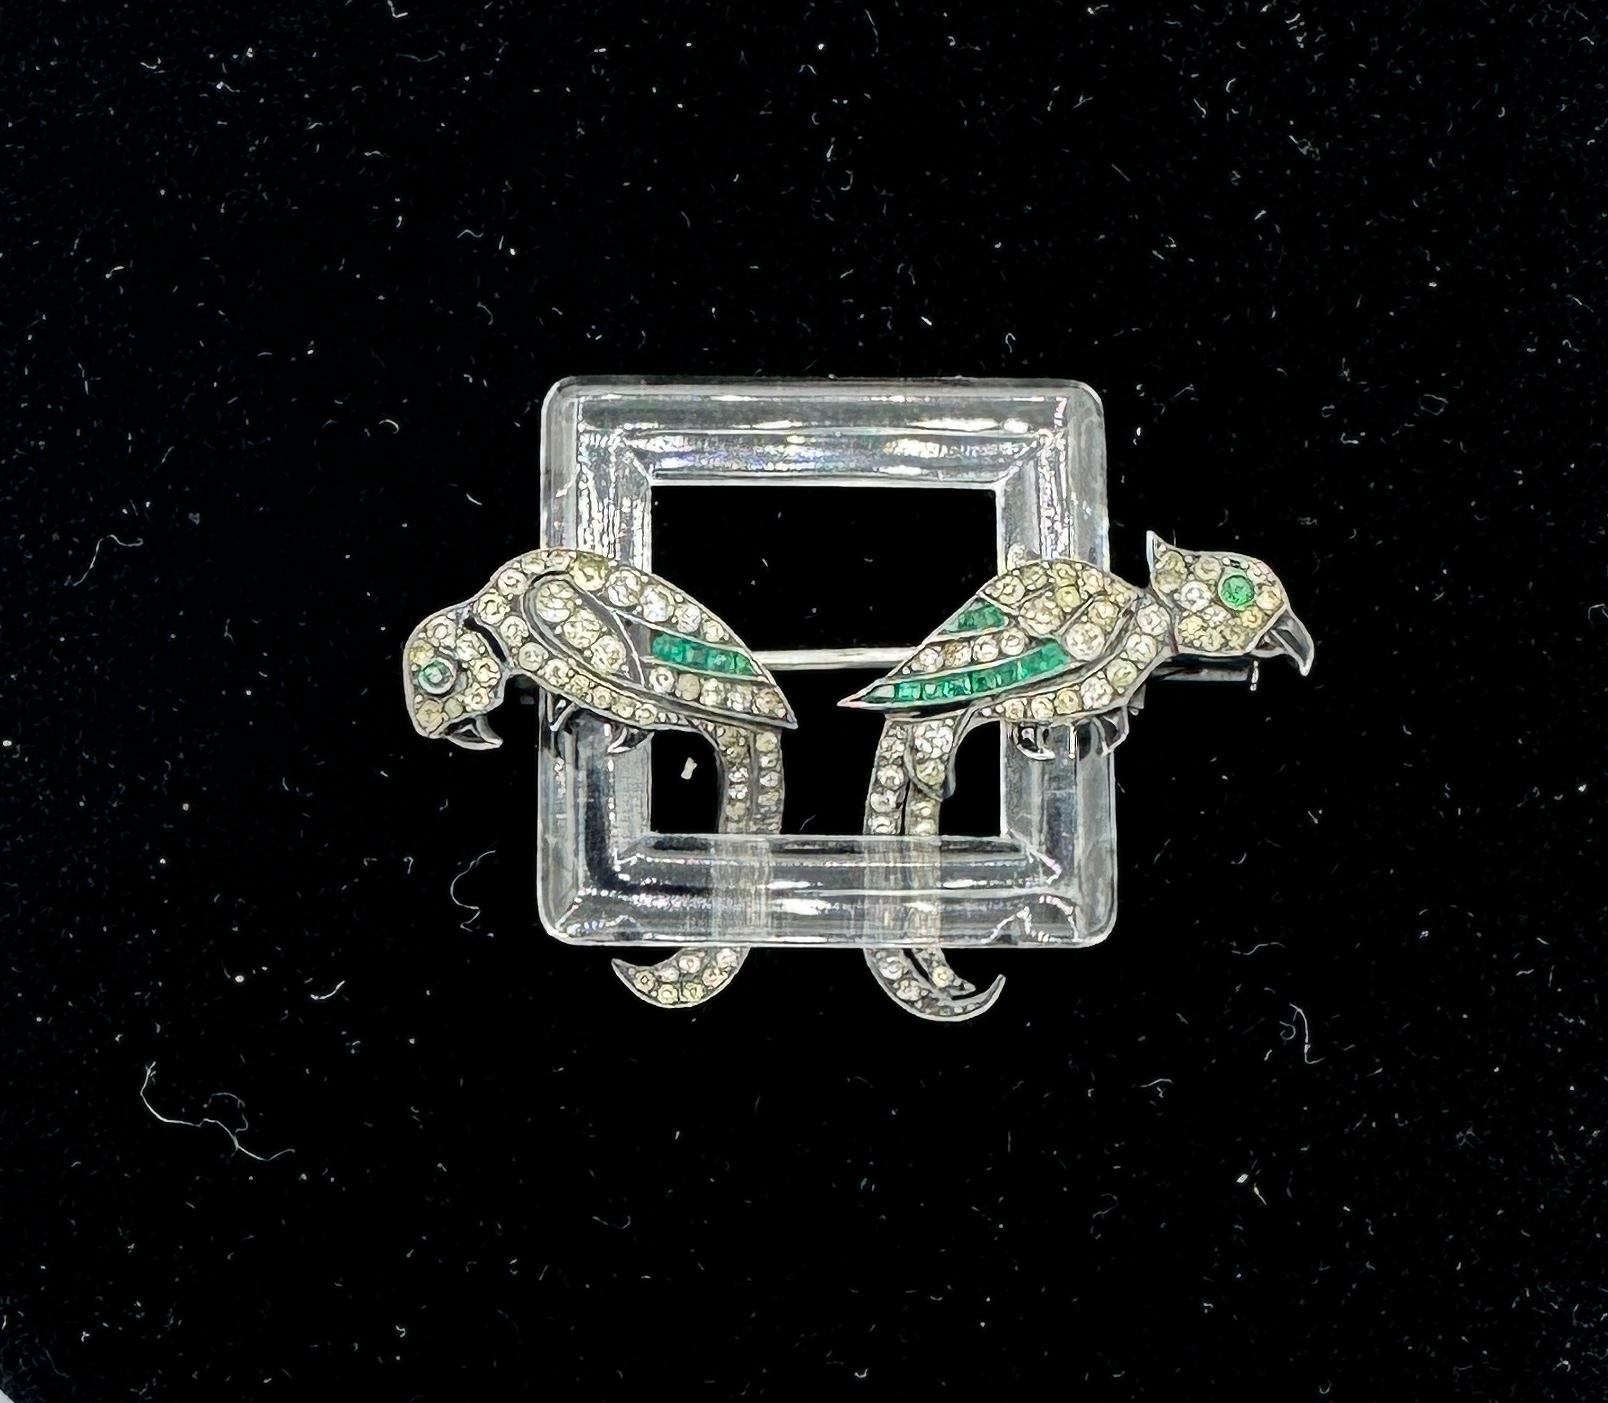 This is a stunning antique Art Deco French Parrot Bird Brooch with a Rock Crystal square frame perch, two parrots in Sterling Silver with paste and Black Onyx adornment.  The brooch is signed with the French Eagle's head for Sterling Silver as well